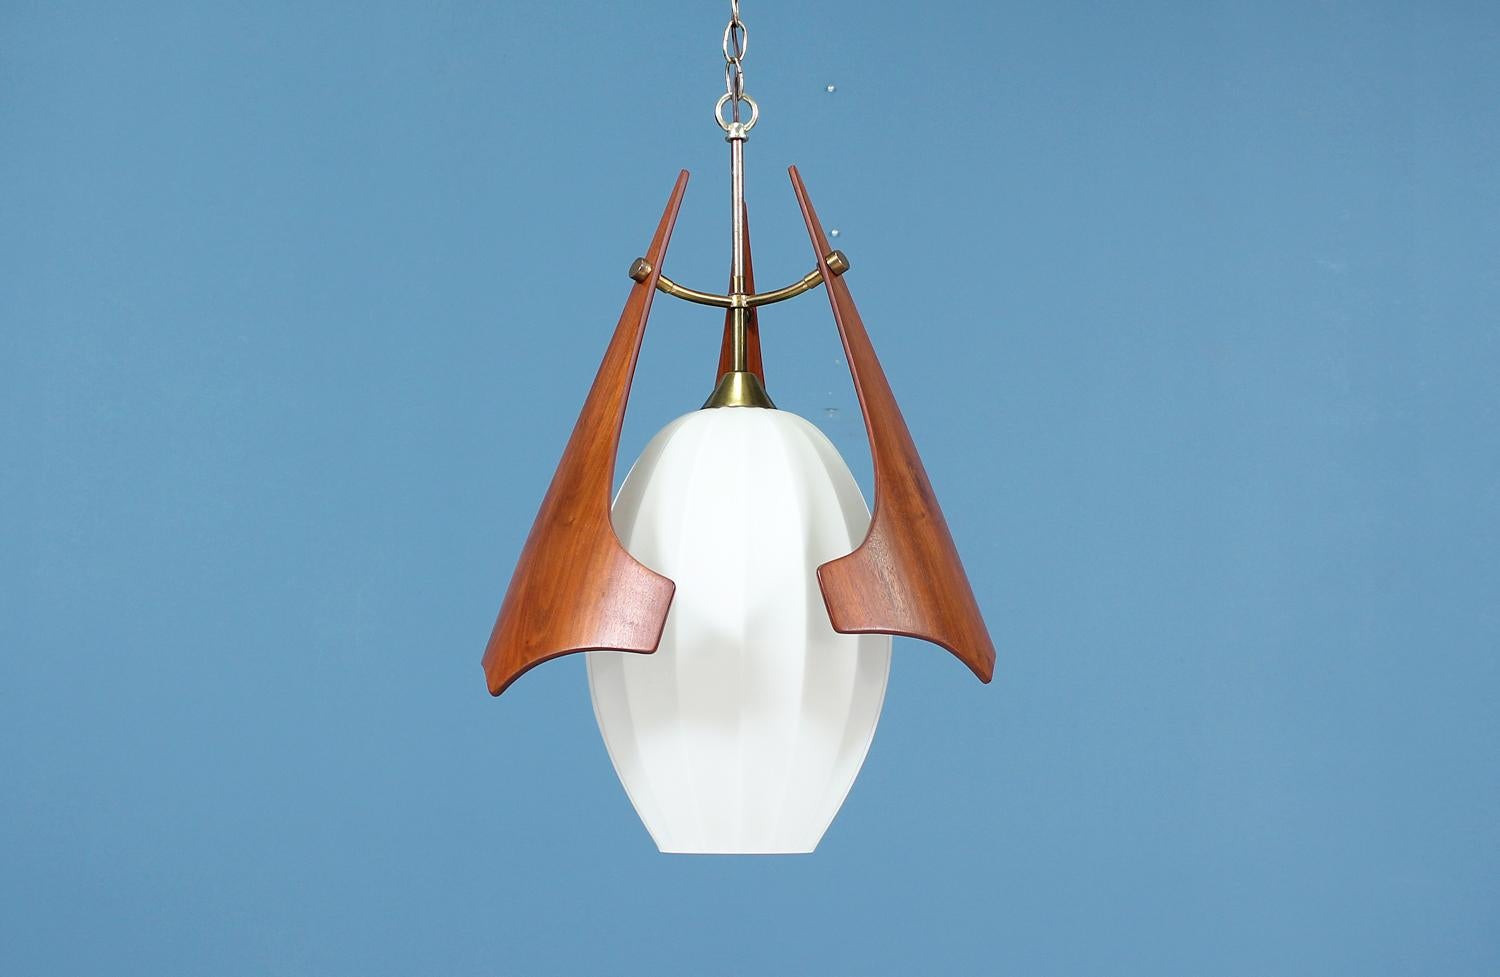 Stunning pendant chandelier designed and manufactured in the United States circa 1960’s. While maintaining its original pieces, this elegant pendant features a frosted glass surrounded by three newly refinished sculptural walnut wood pieces that